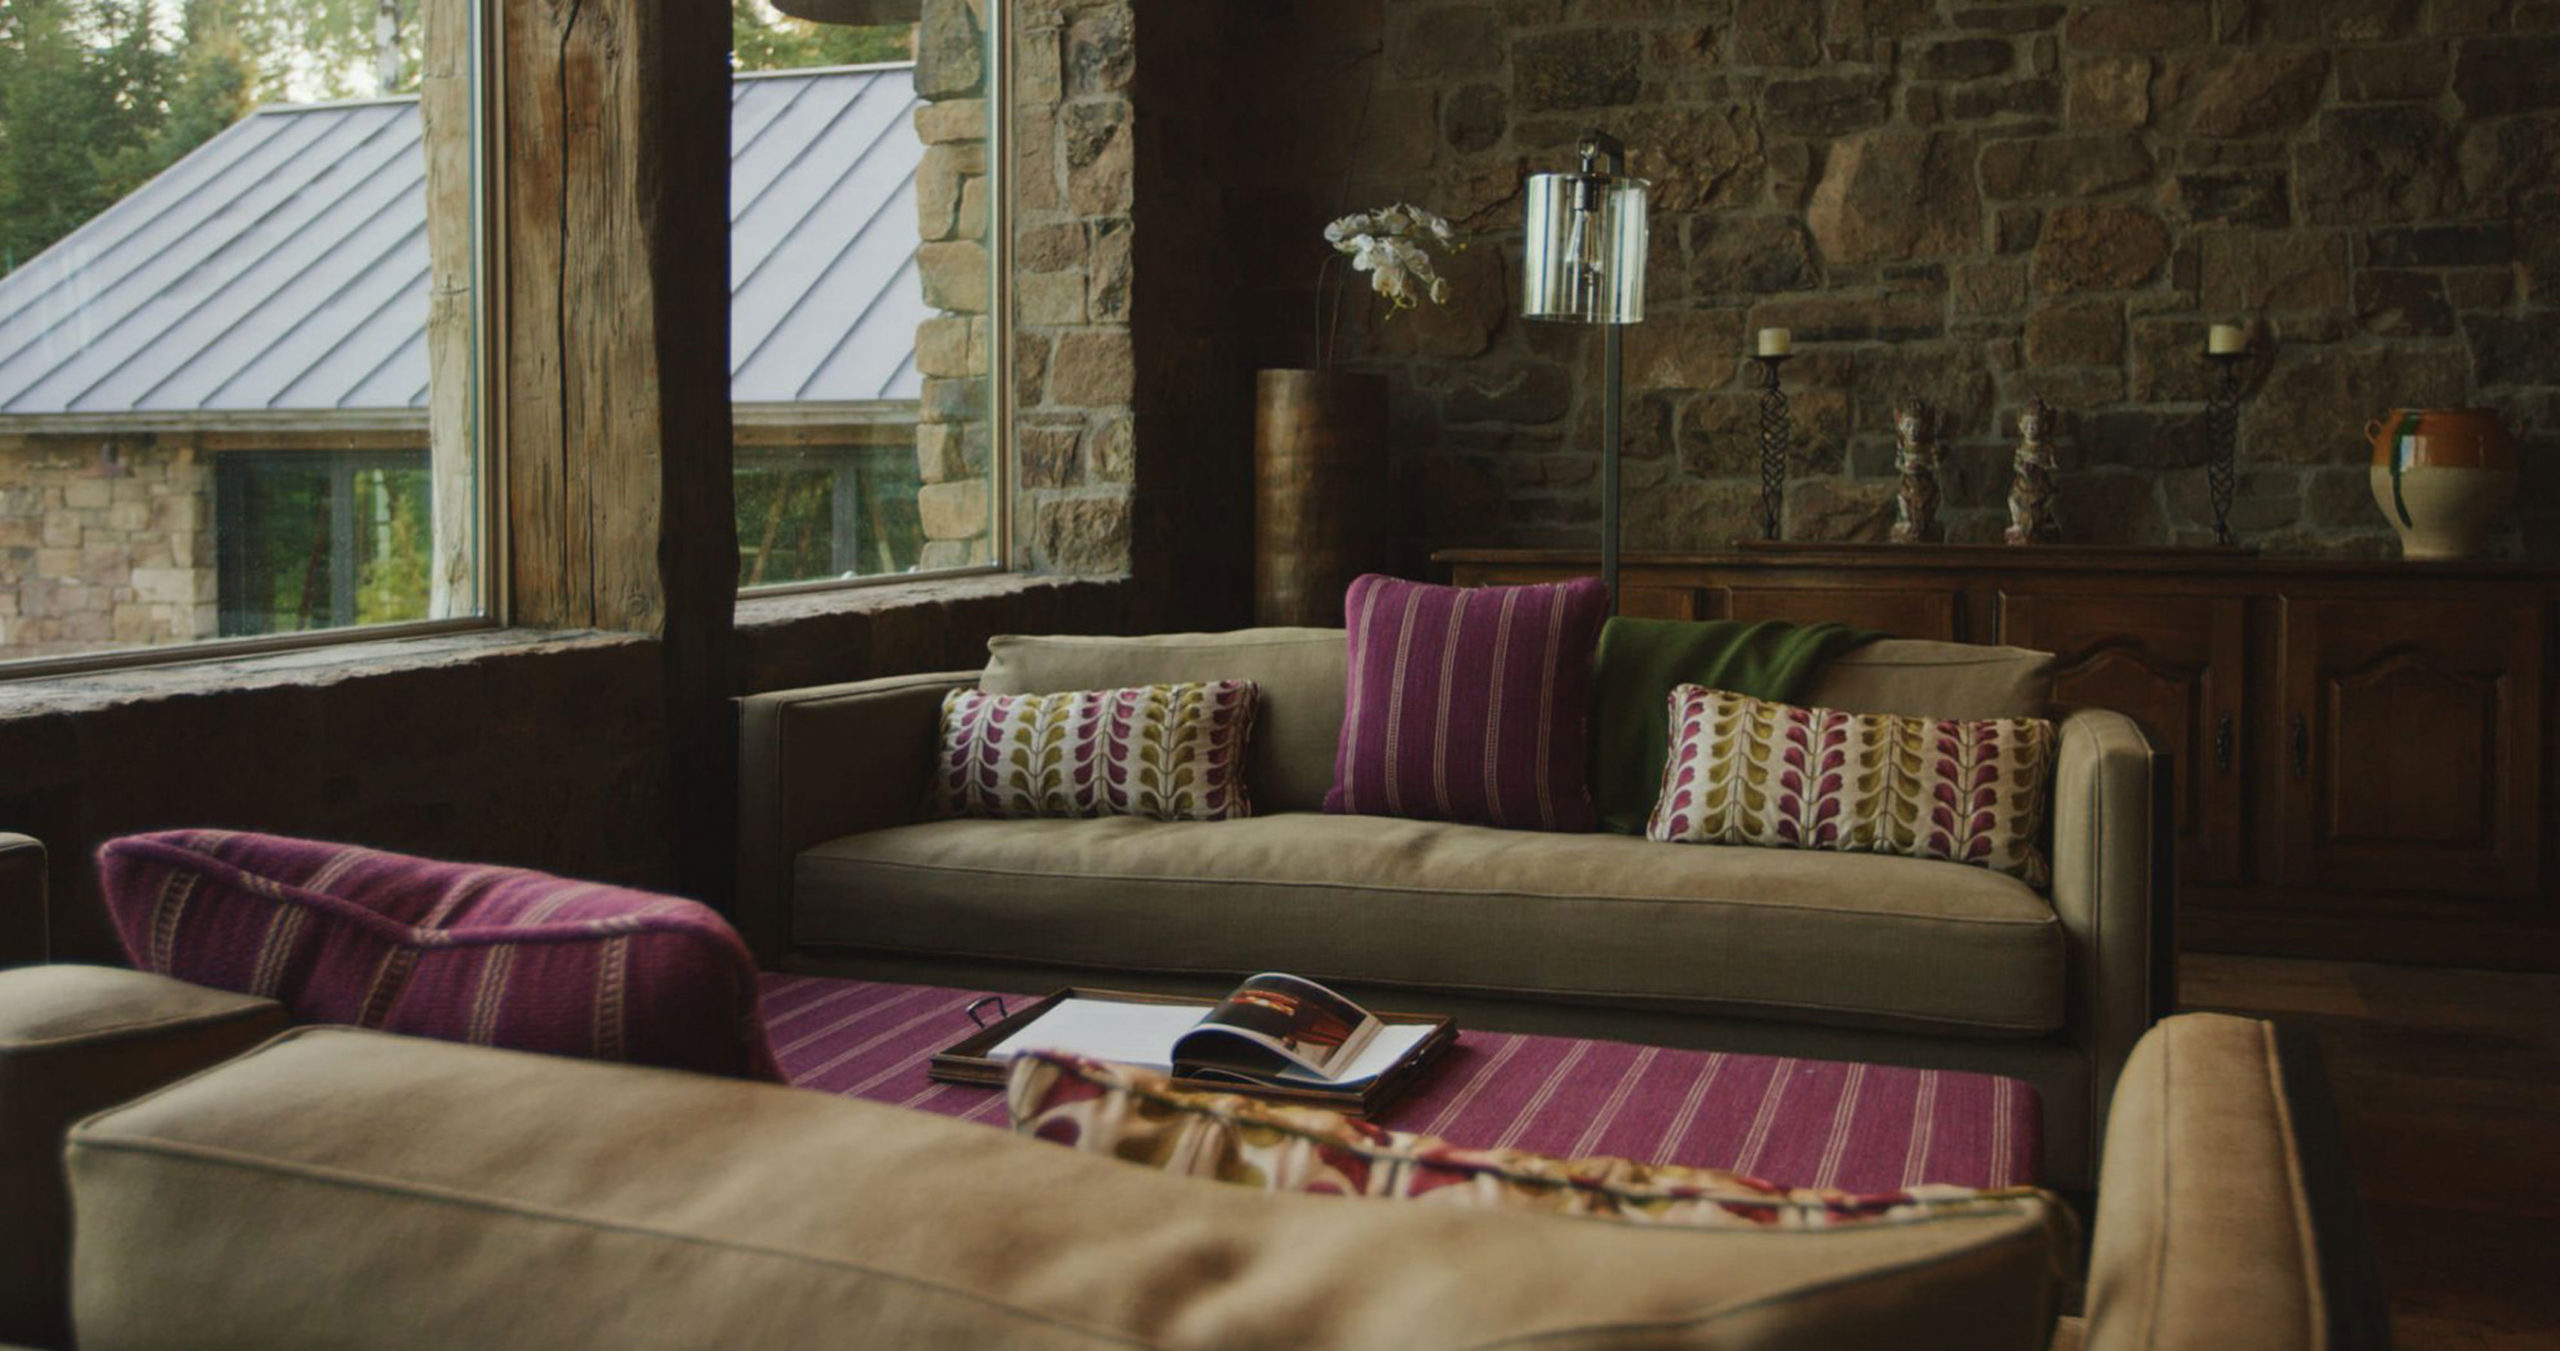 New-Thought-JLF-Architects-Video-Production-Design-Build-Dream-Livingroom Sofas And Pillows-fullscreen